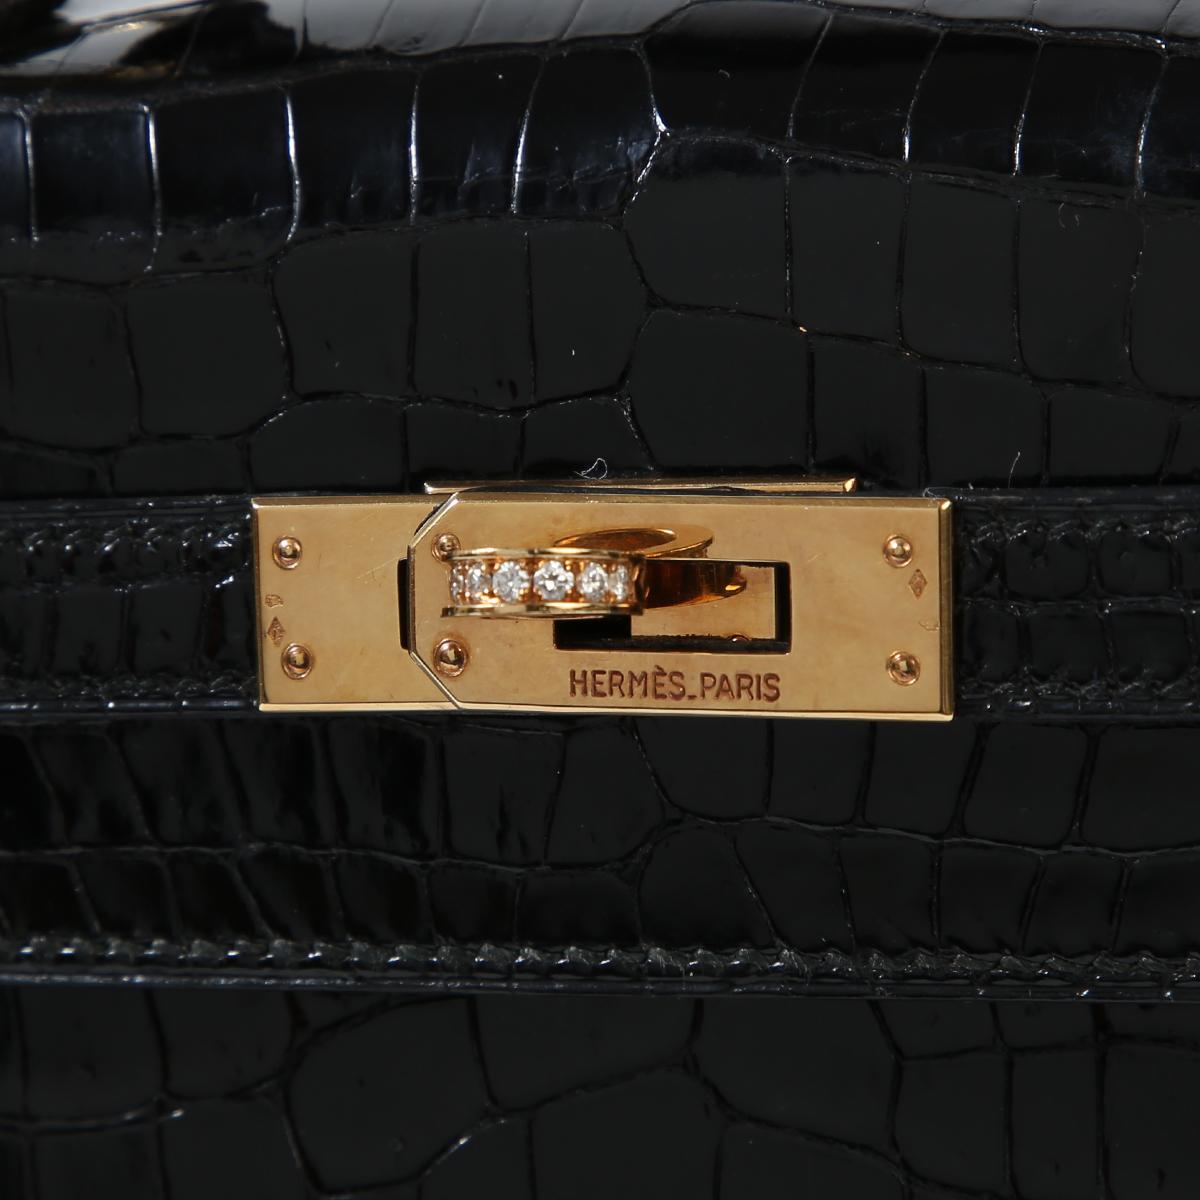 Pre-Owned Vintage Condition
From 1997 Collection
Shiny Crocodile
Diamond
Gold Tone Hardware
Strap Drop 15